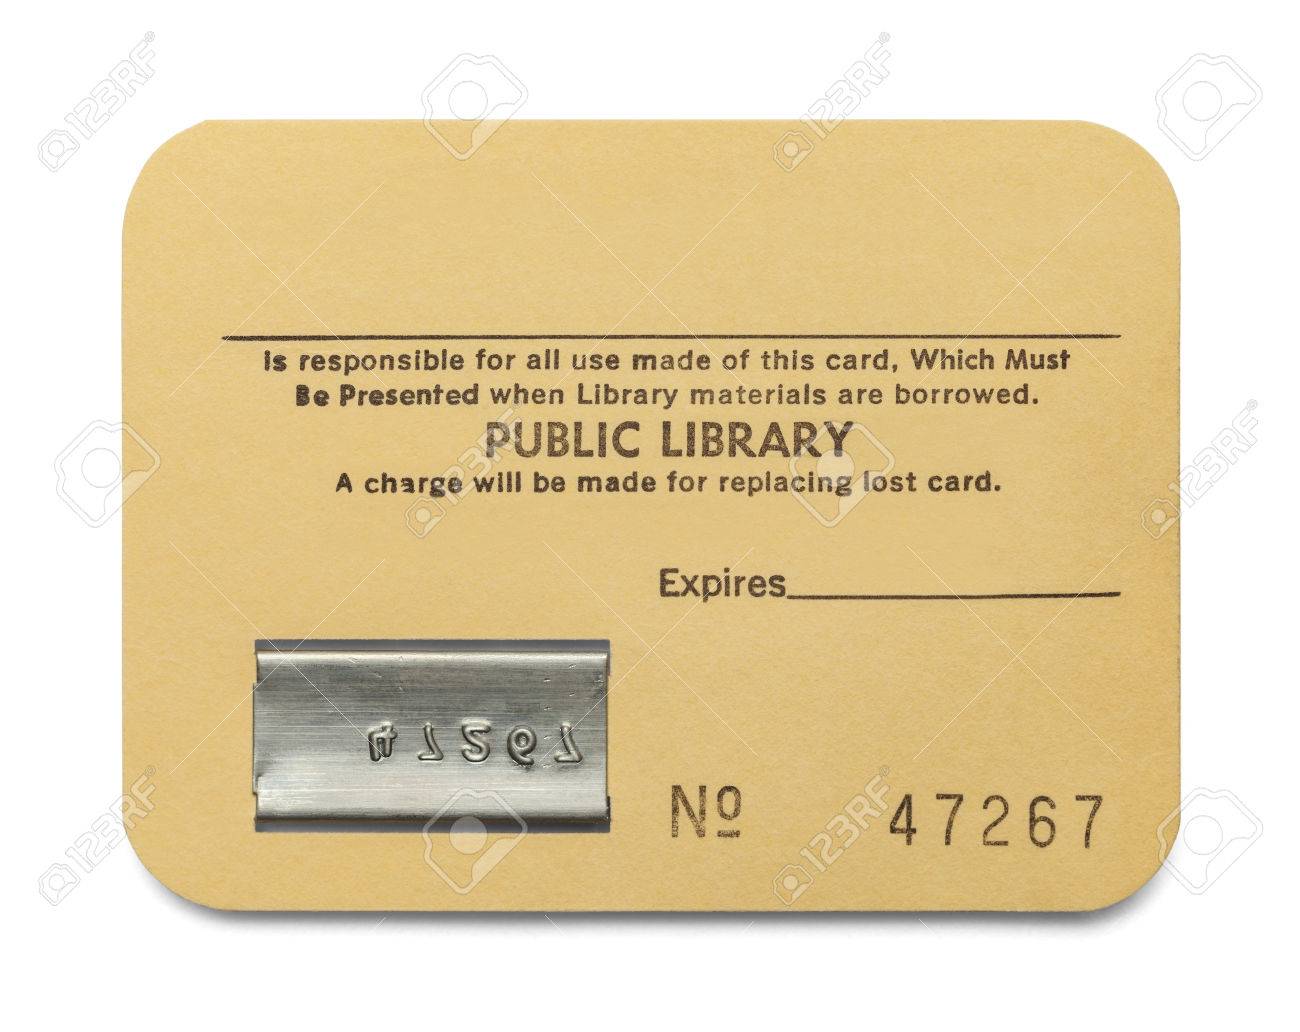 46795219-Old-Paper-Library-Card-with-Copy-Space-Isolated-on-White-Background--Stock-Photo.jpg